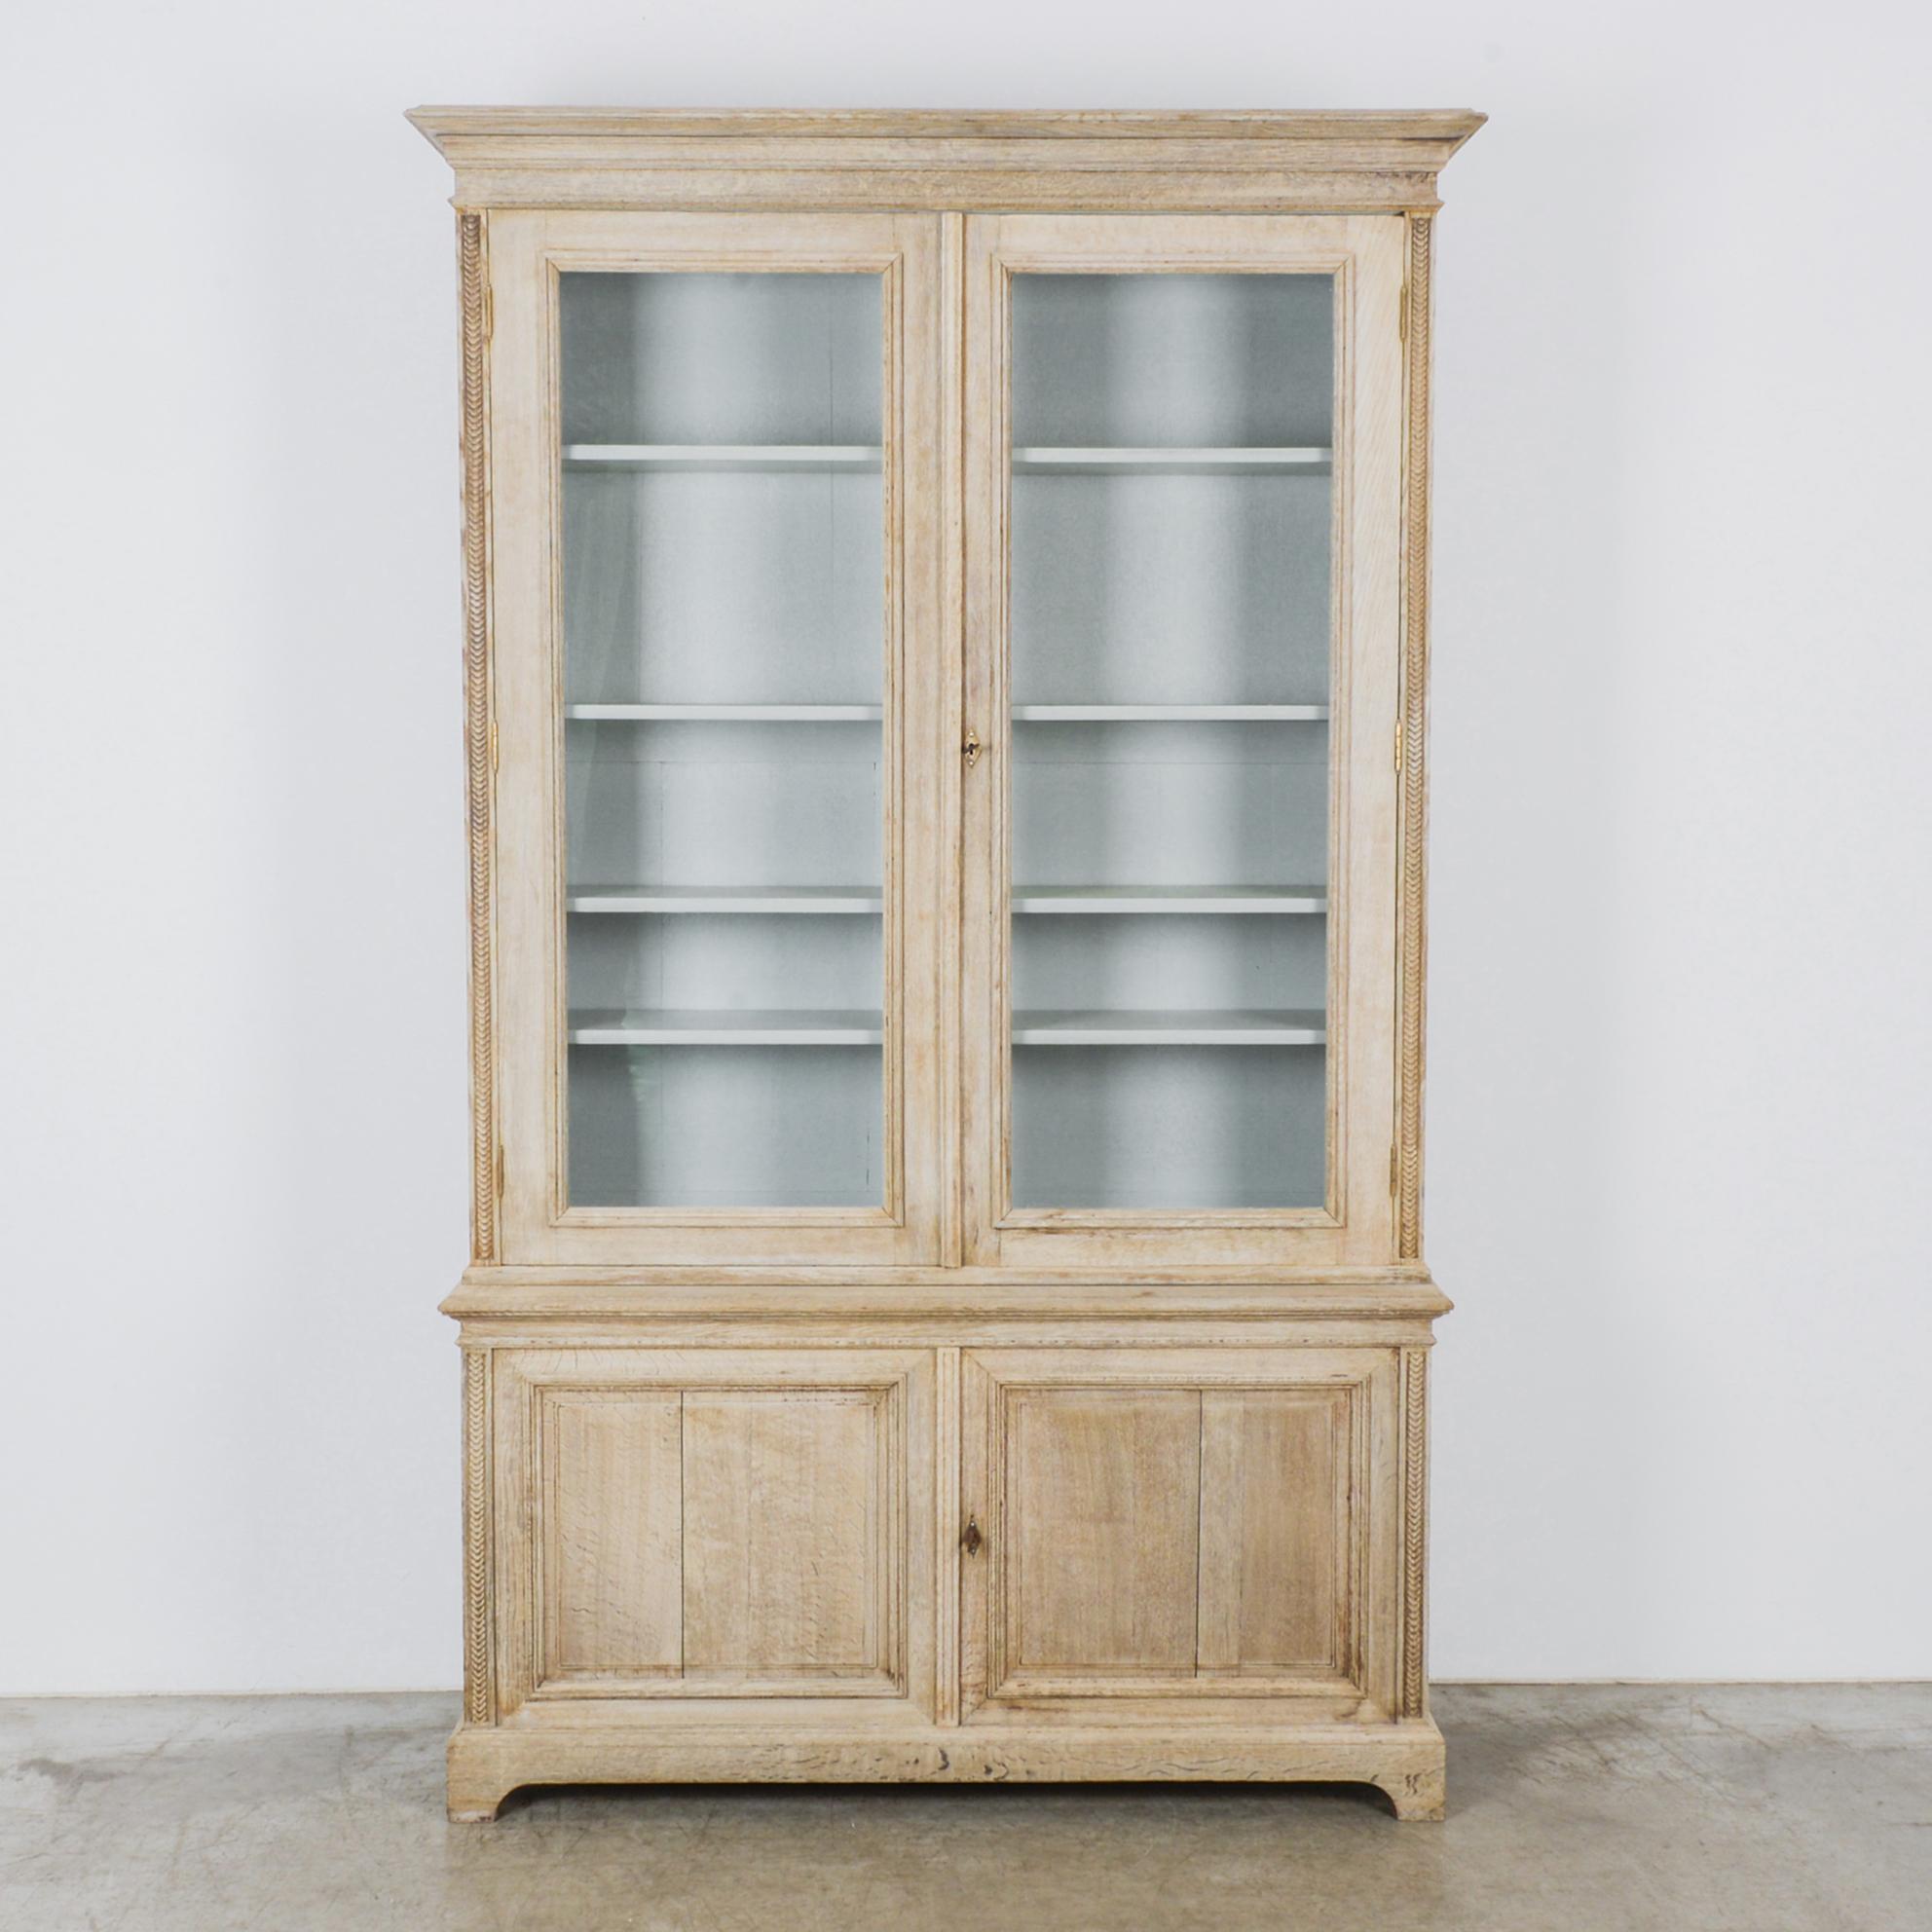 A bleached oak vitrine from France, circa 1880s. Glass fronted double doors open onto four shelves. The interior is painted a robin’s egg blue, complementing the light, cheerful tone of the bleached oak. Beneath the vitrine is a small cabinet with a